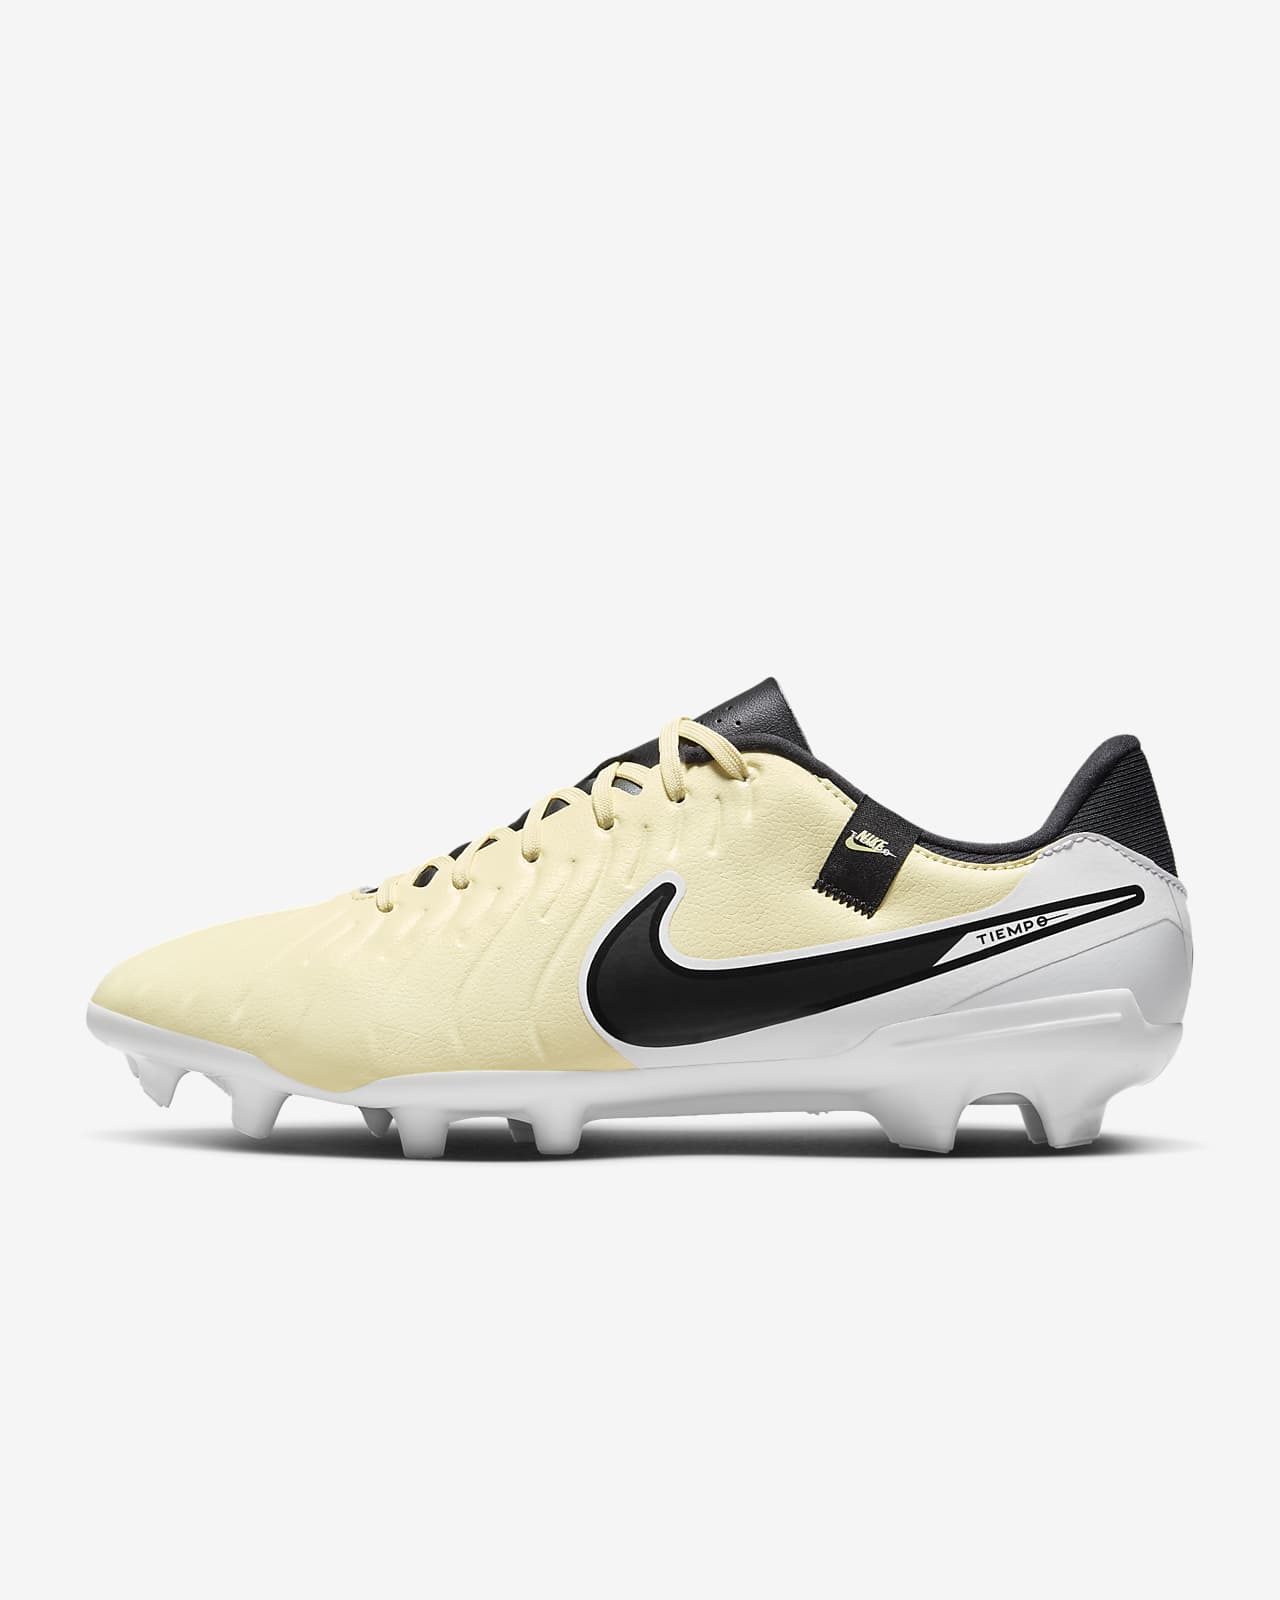 Nike Tiempo Legend 10 Academy Multi-Ground Low-Top Soccer Cleats.